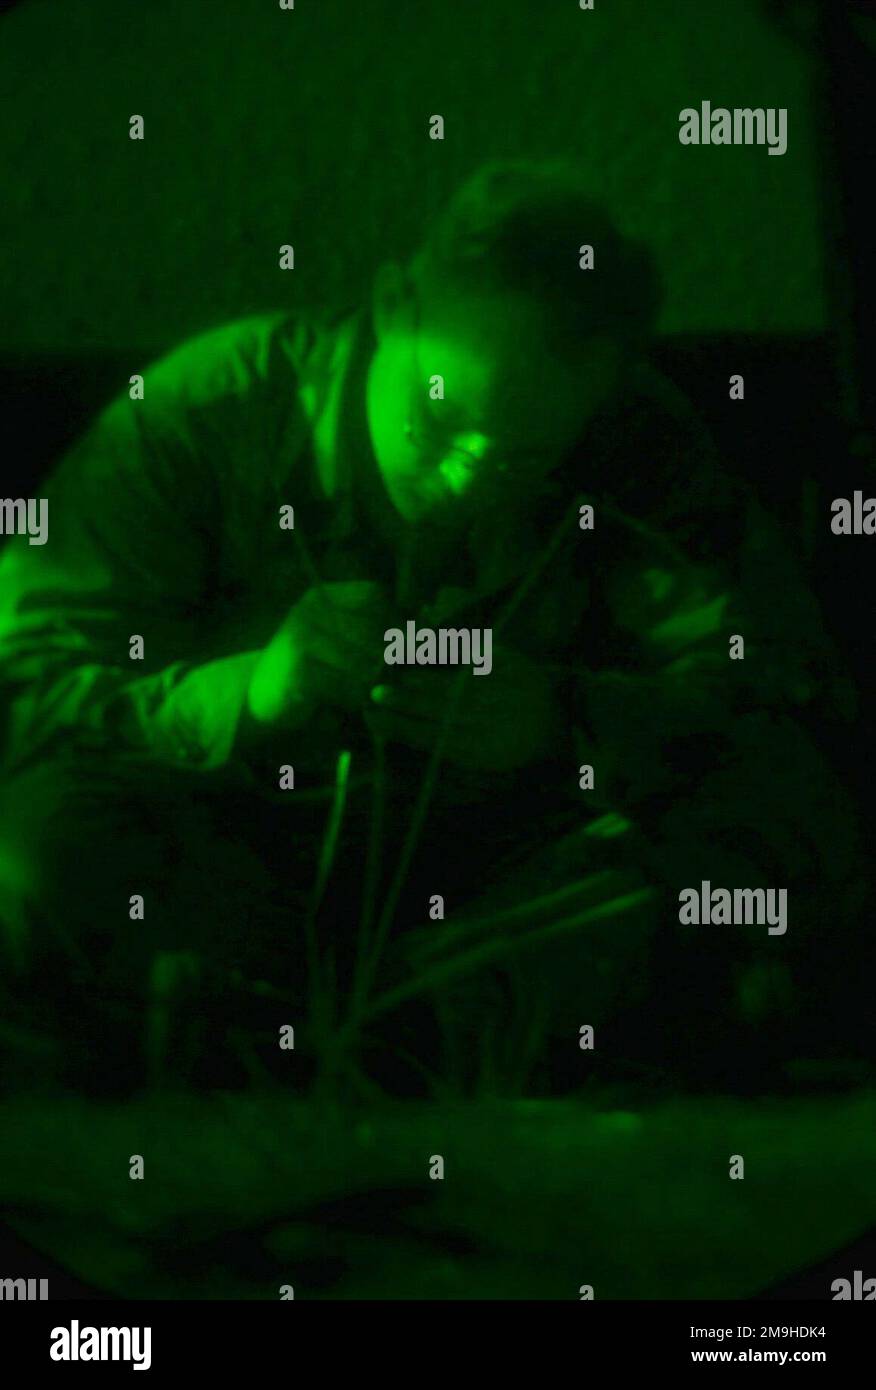 As seen through the green glow of a night scope, Lance Corporal James D. Matkin, Tanker, with BLT 1/4 (Battalion Landing Team), 13th Marine Expeditionary Unit (Special Operations Capable) (MEU (SOC)) writes a letter using only the light emanating from the Command Post in Kenya, Africa. The Marines are there as part of Exercise EDGED MALLET 02. Subject Operation/Series: EDGED MALLET 02 Base: Command Post State: Coast Country: Kenya (KEN) Scene Major Command Shown: 13 MEU Stock Photo